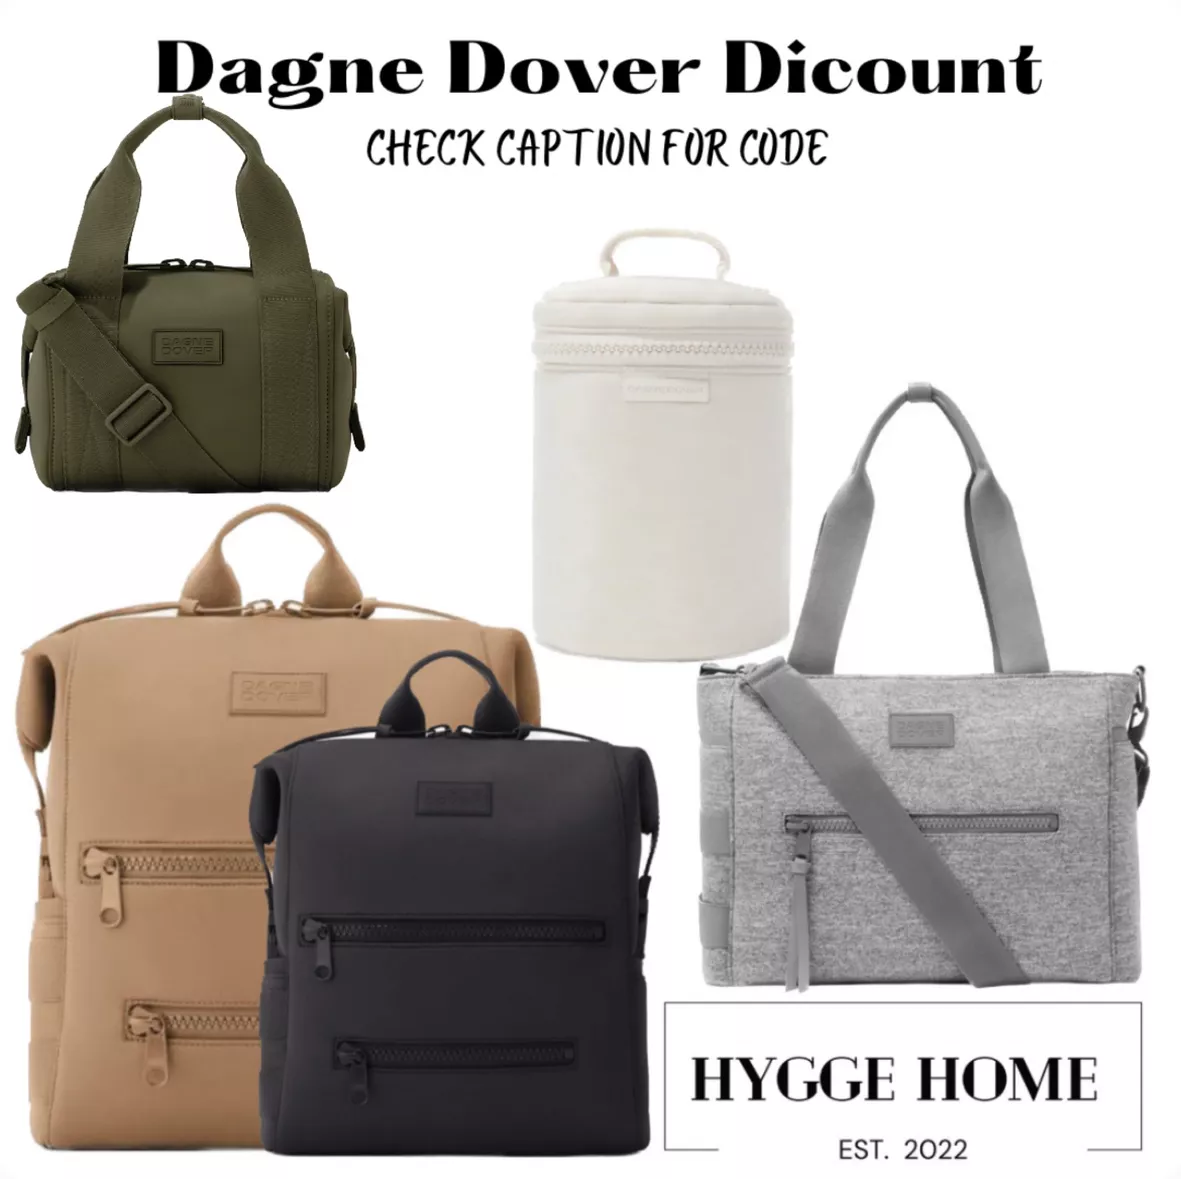 Dagne Dover's Dakota Backpack Would Be A Great Gift in 2022